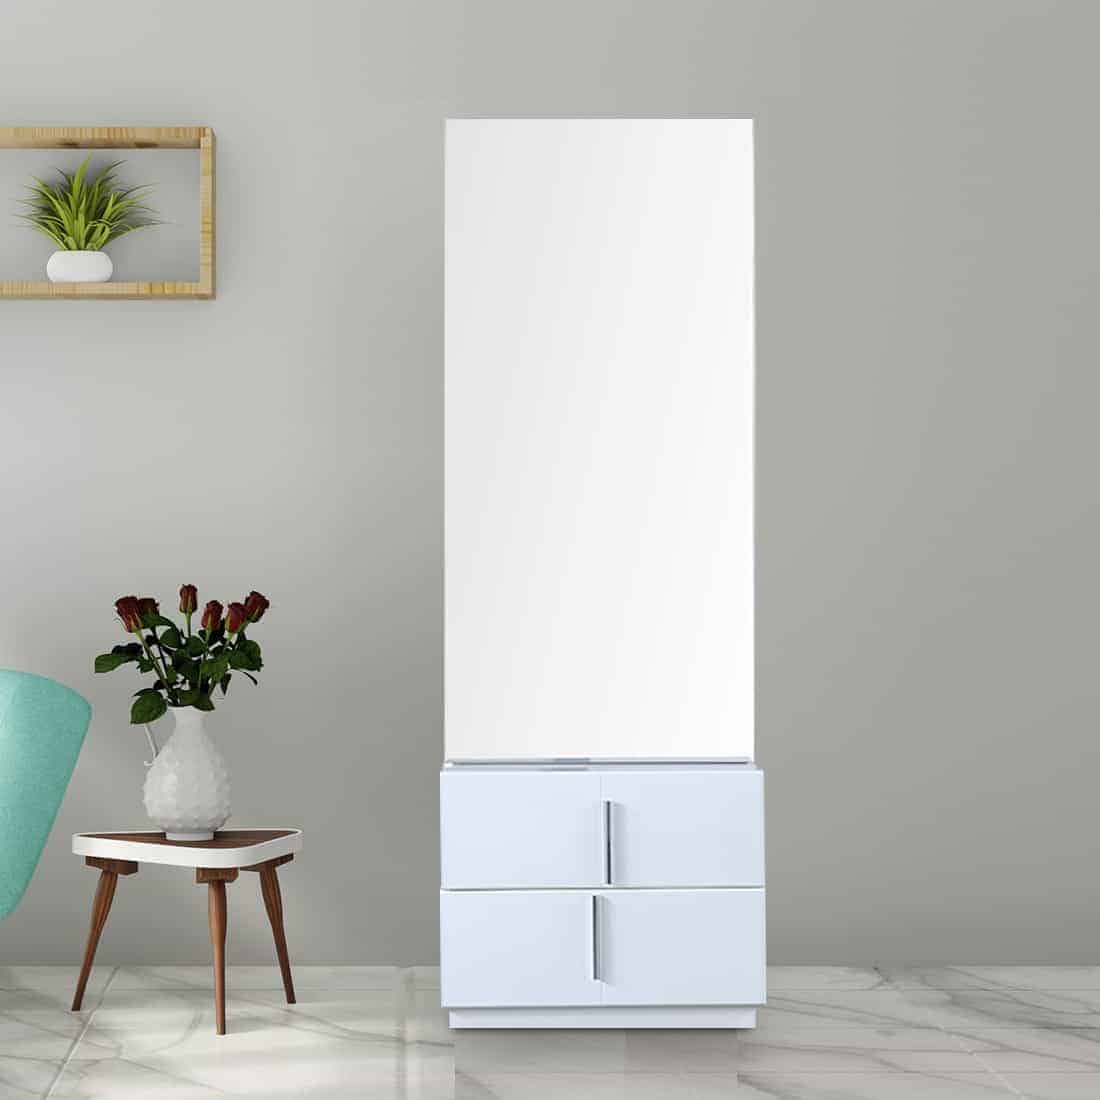 A simple white-colored white dresser with a rectangular mirror and minimum storage space, in a white room.